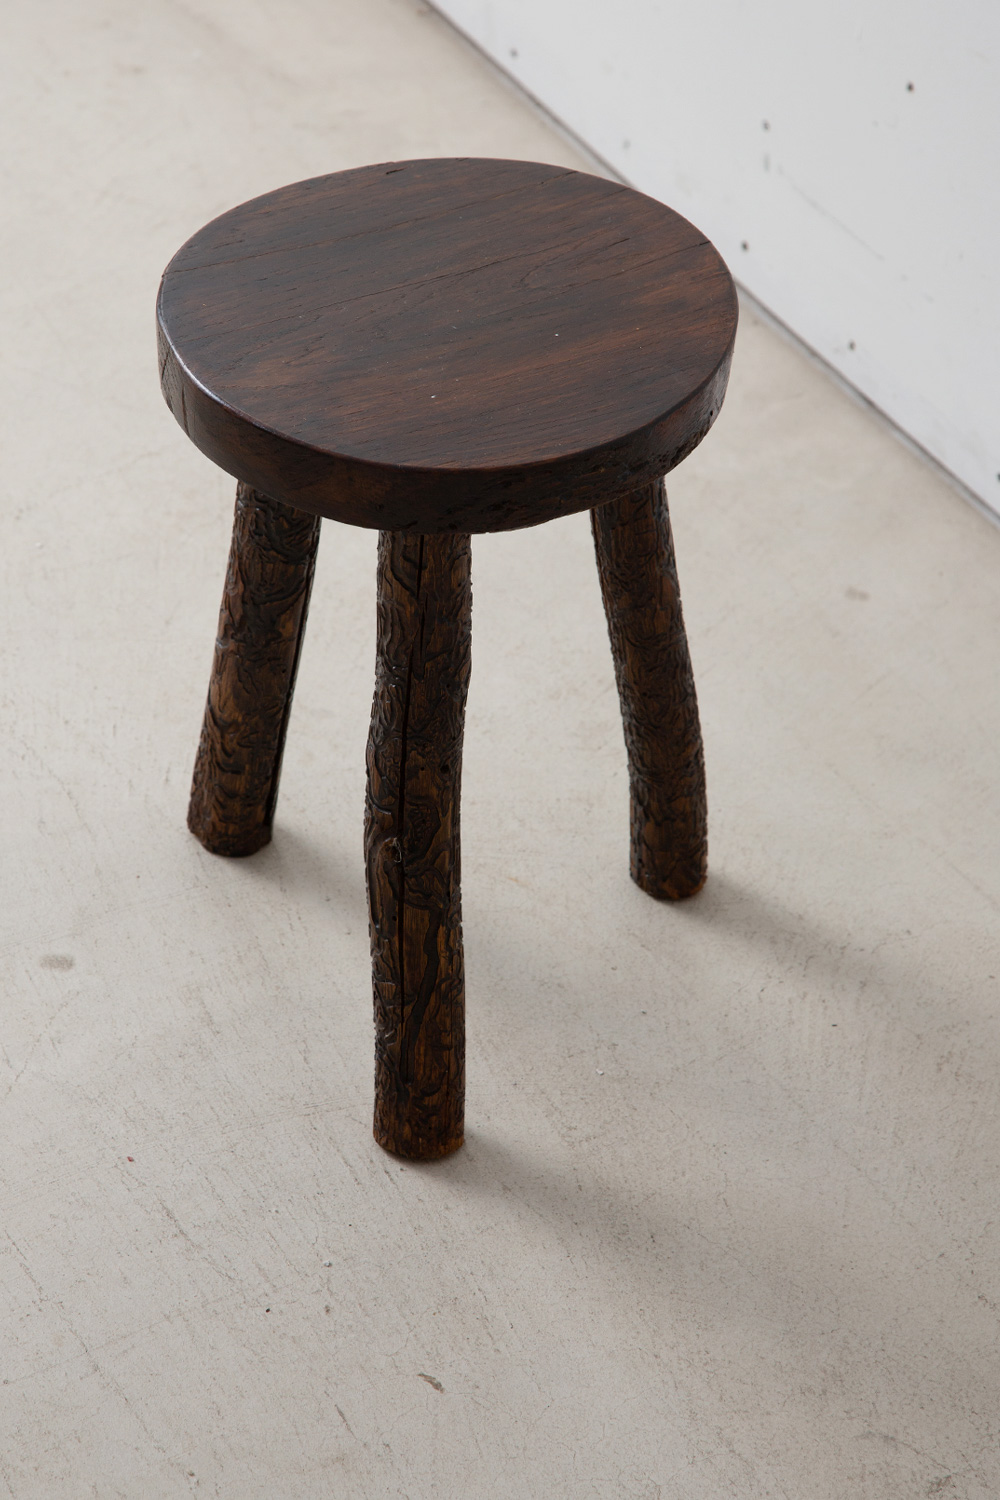 Vintage Tripod Small Stool #02 in Wood